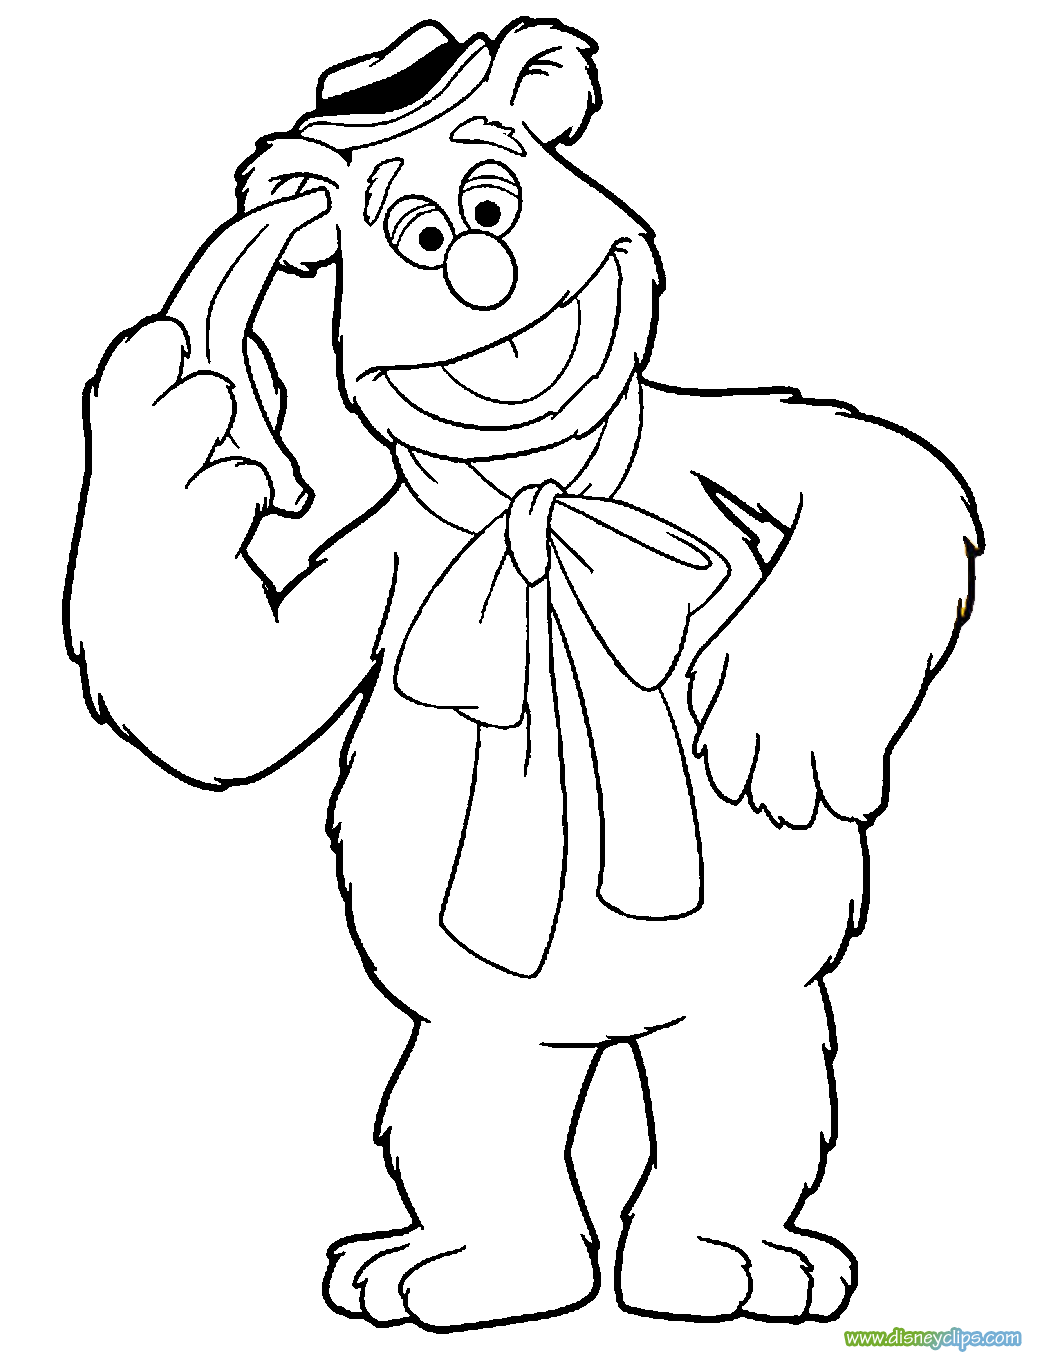 Kermit The Frog Coloring Page | Coloring Page